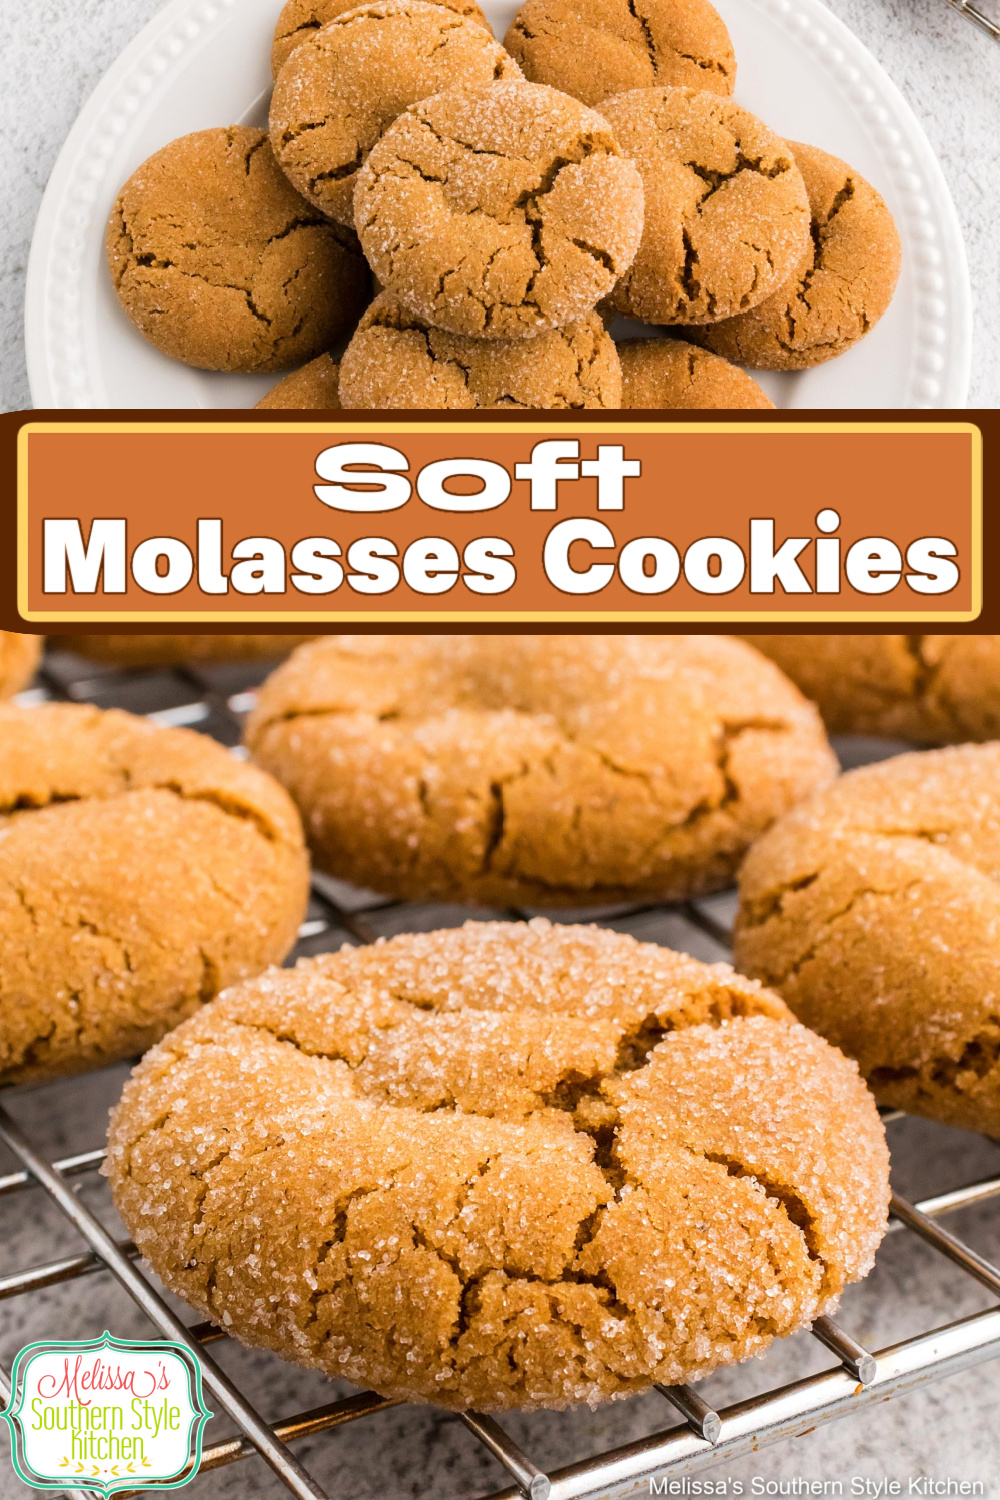 These crackled soft Molasses Cookies are simply heavenly with a cup of coffee or a tall glass of cold milk #molassescookies #gingercookies #cookierecipes #fallbaking #christmascookies #easymolassescookies #easycookies via @melissasssk